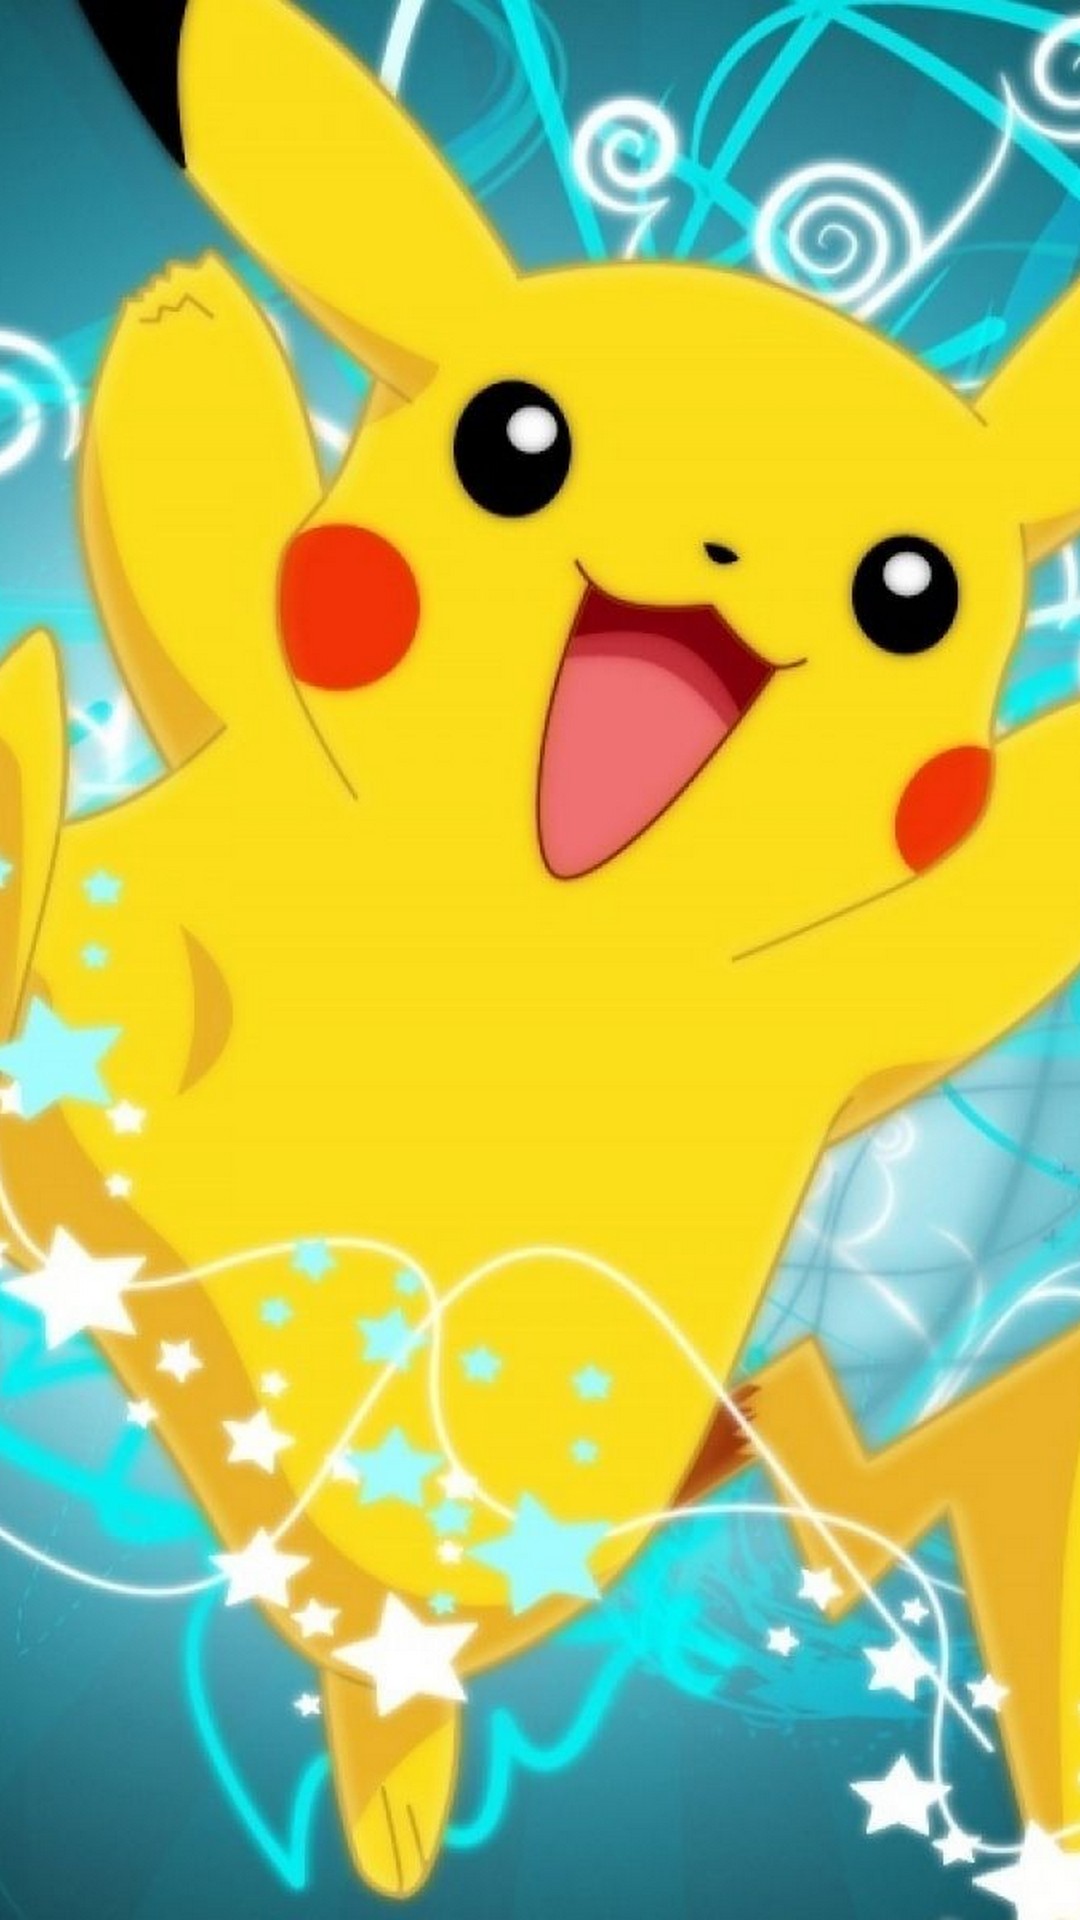 Wallpaper Pokemon iPhone With high-resolution 1080X1920 pixel. You can use this wallpaper for your iPhone 5, 6, 7, 8, X, XS, XR backgrounds, Mobile Screensaver, or iPad Lock Screen